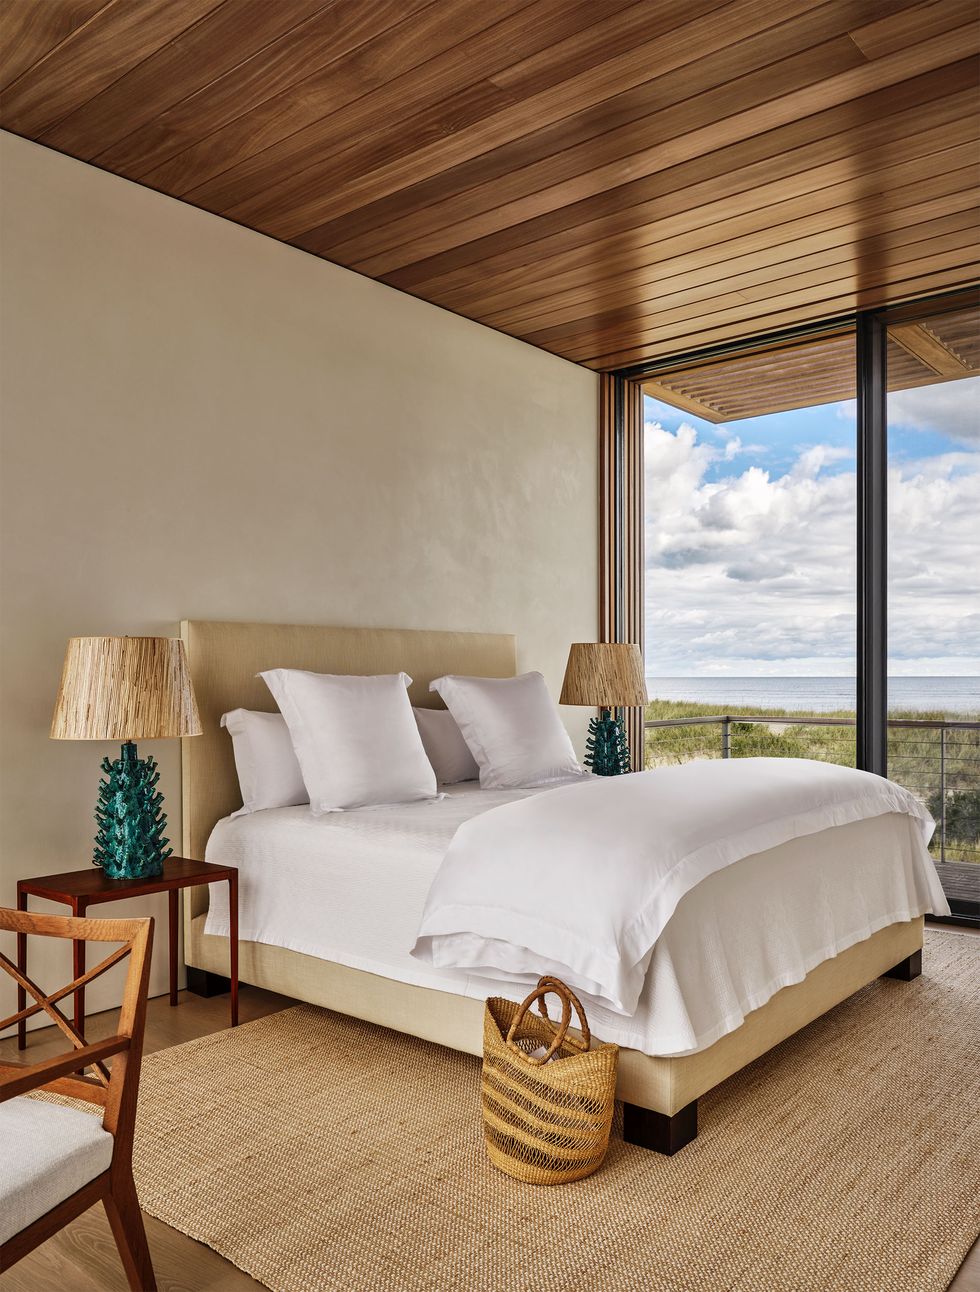 Bed with upholstered headboard and frame, white bedding, night tables with lamps with coral-like bases, natural rug, bedside basket, wooden ceiling and floor, glass doors to the terrace above the sand dunes